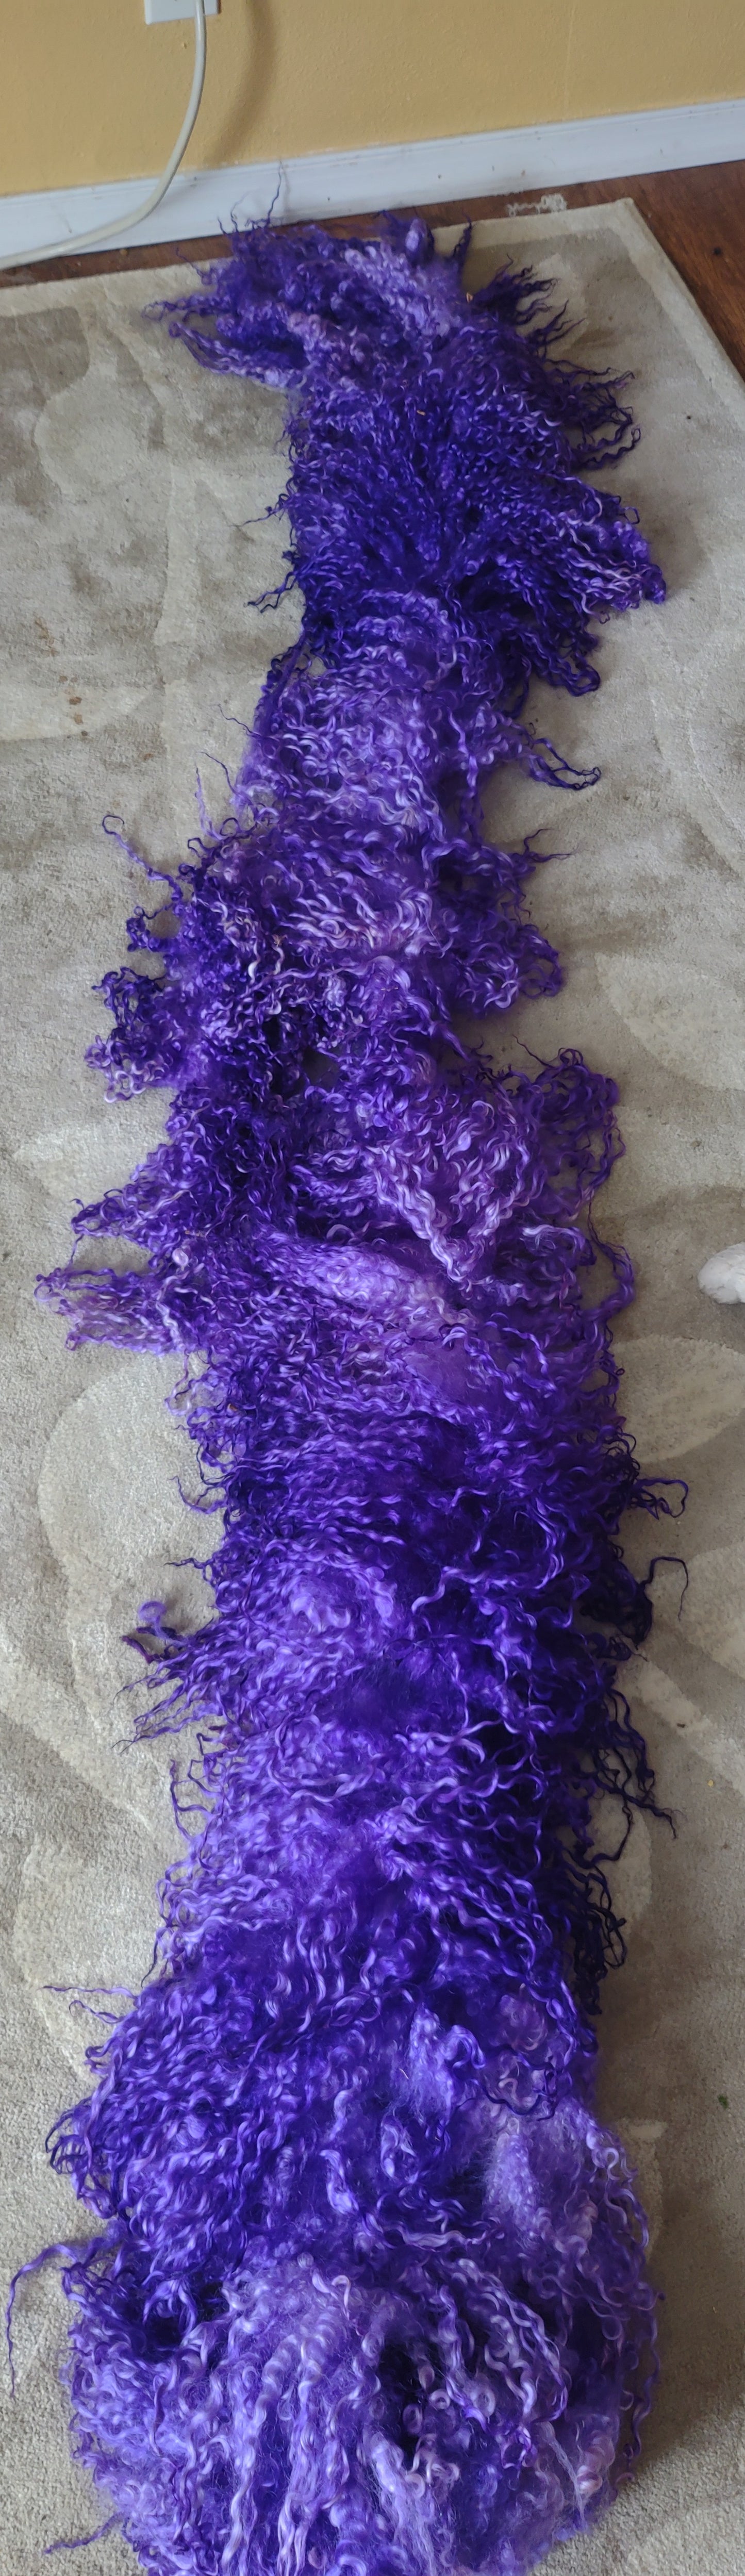 Beautiful lilac wisteria dyed 2 lb semi felted on bavk 1st clip Teeswater great for pulling locks